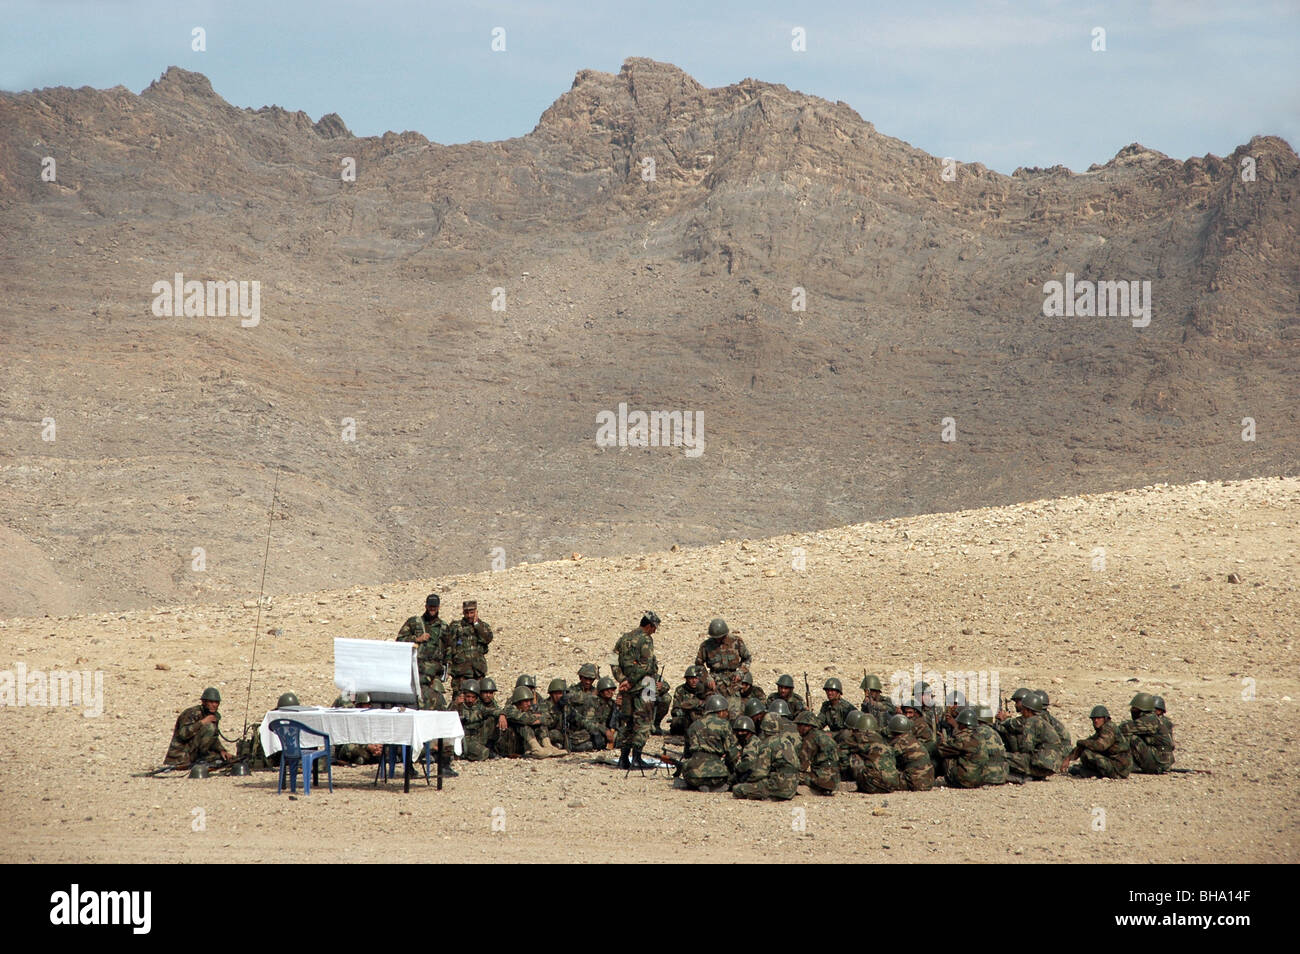 A group of Afghan National Army (ANA) recruits receiving basic training in an outdoor classroom setting in the mountains near Kabul, Afghanistan. Stock Photo